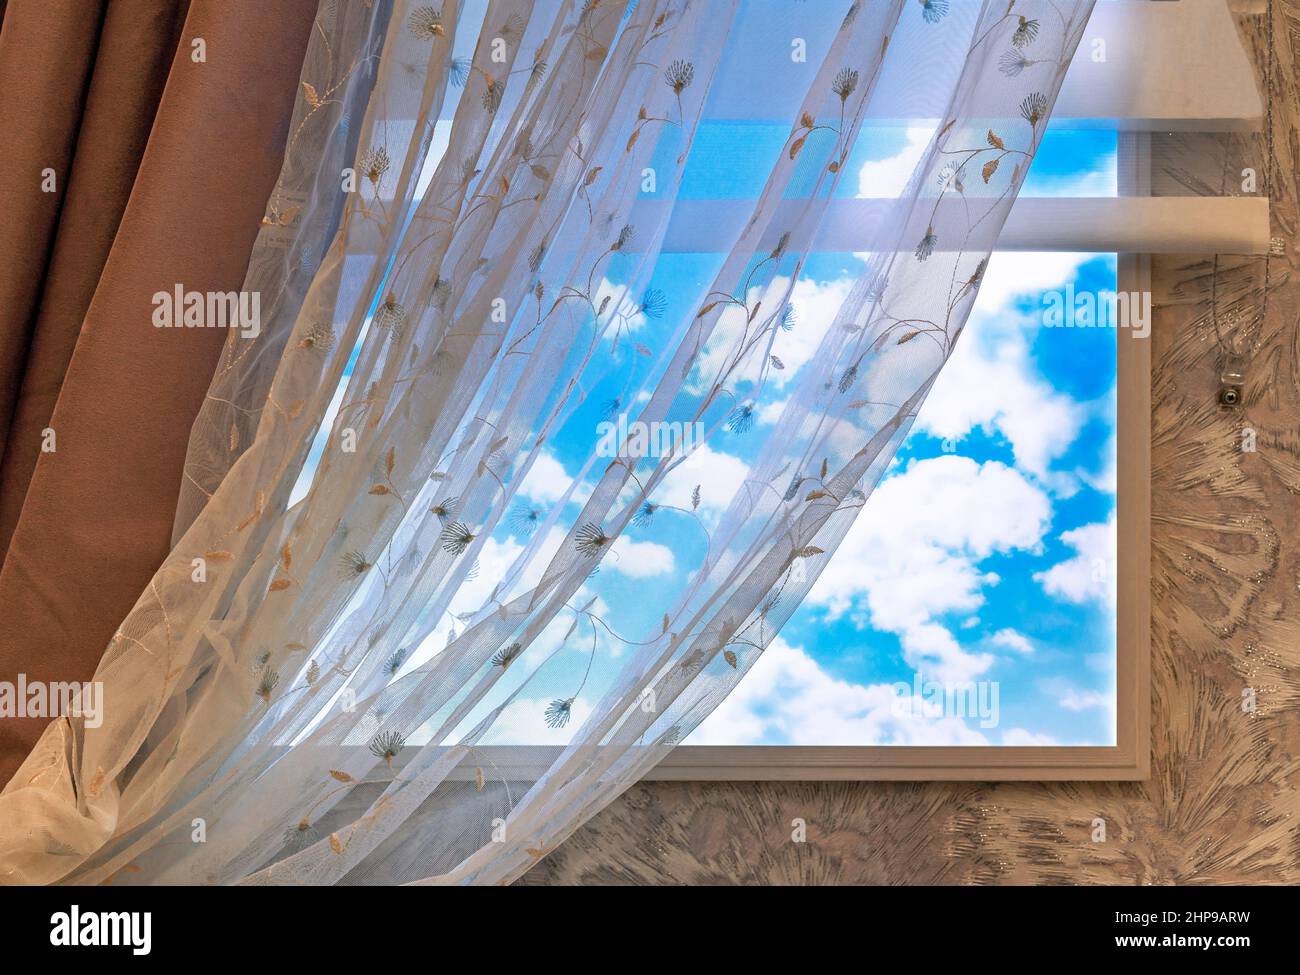 Curtan and transparent tulle on the window with clouds. Stock Photo